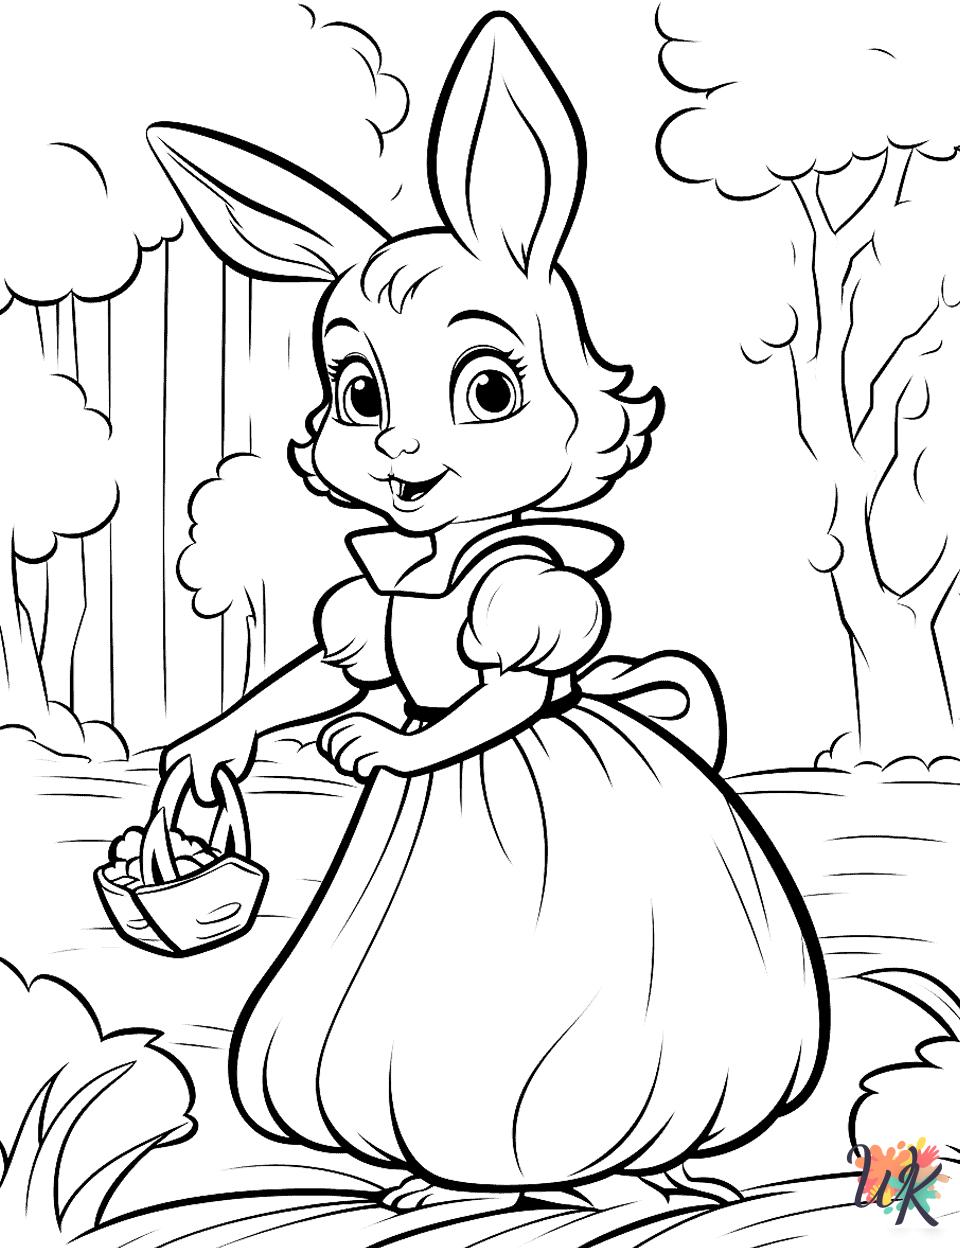 Rabbits coloring pages for adults easy